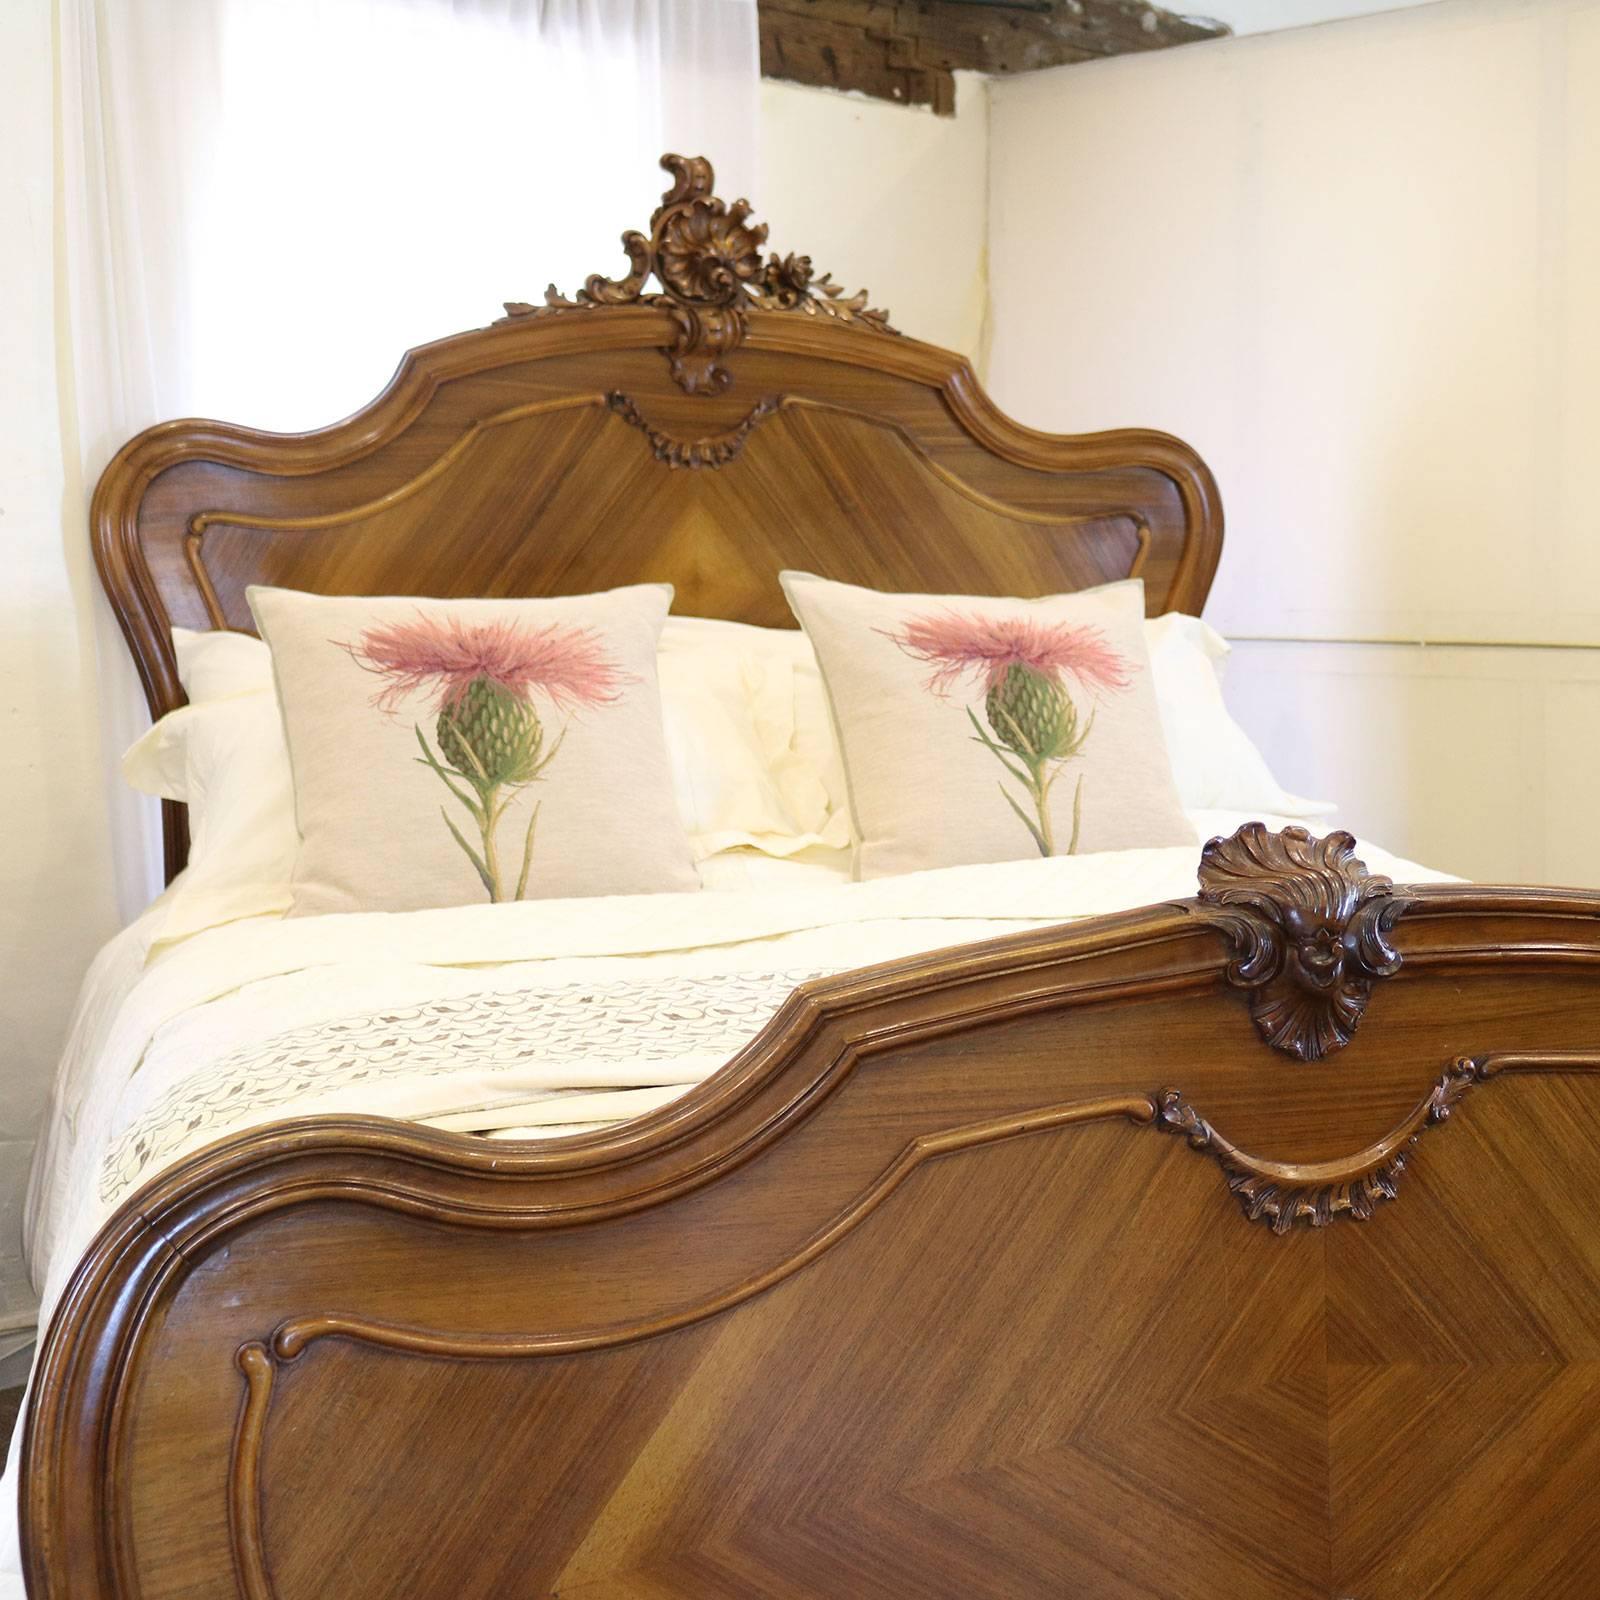 A French Louis XV style bed with ornate carving on the head panel and shaped head and foot boards.

This bed accepts a British king-size or American queen-size (60 in wide) base and mattress set.

The price is for the bed frame alone. The base,